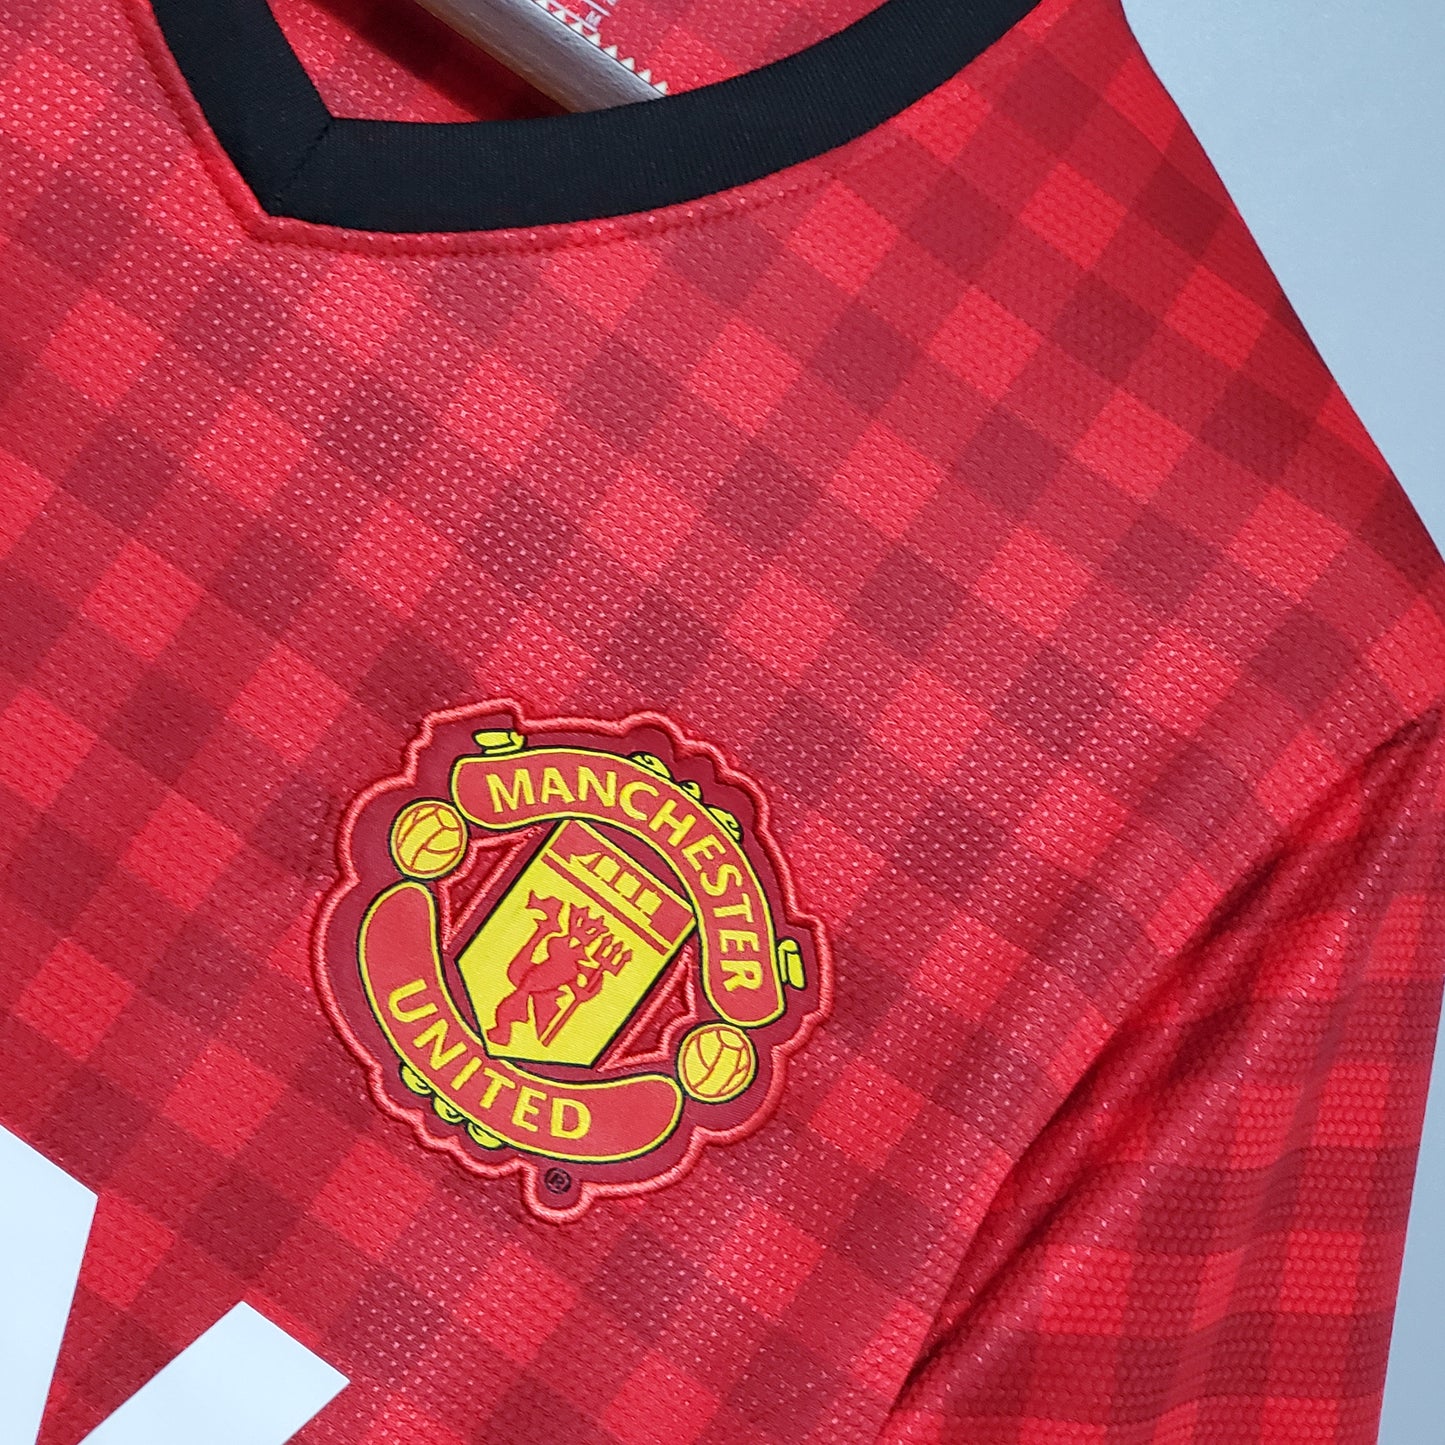 Manchester United 2012/13 Home Jersey